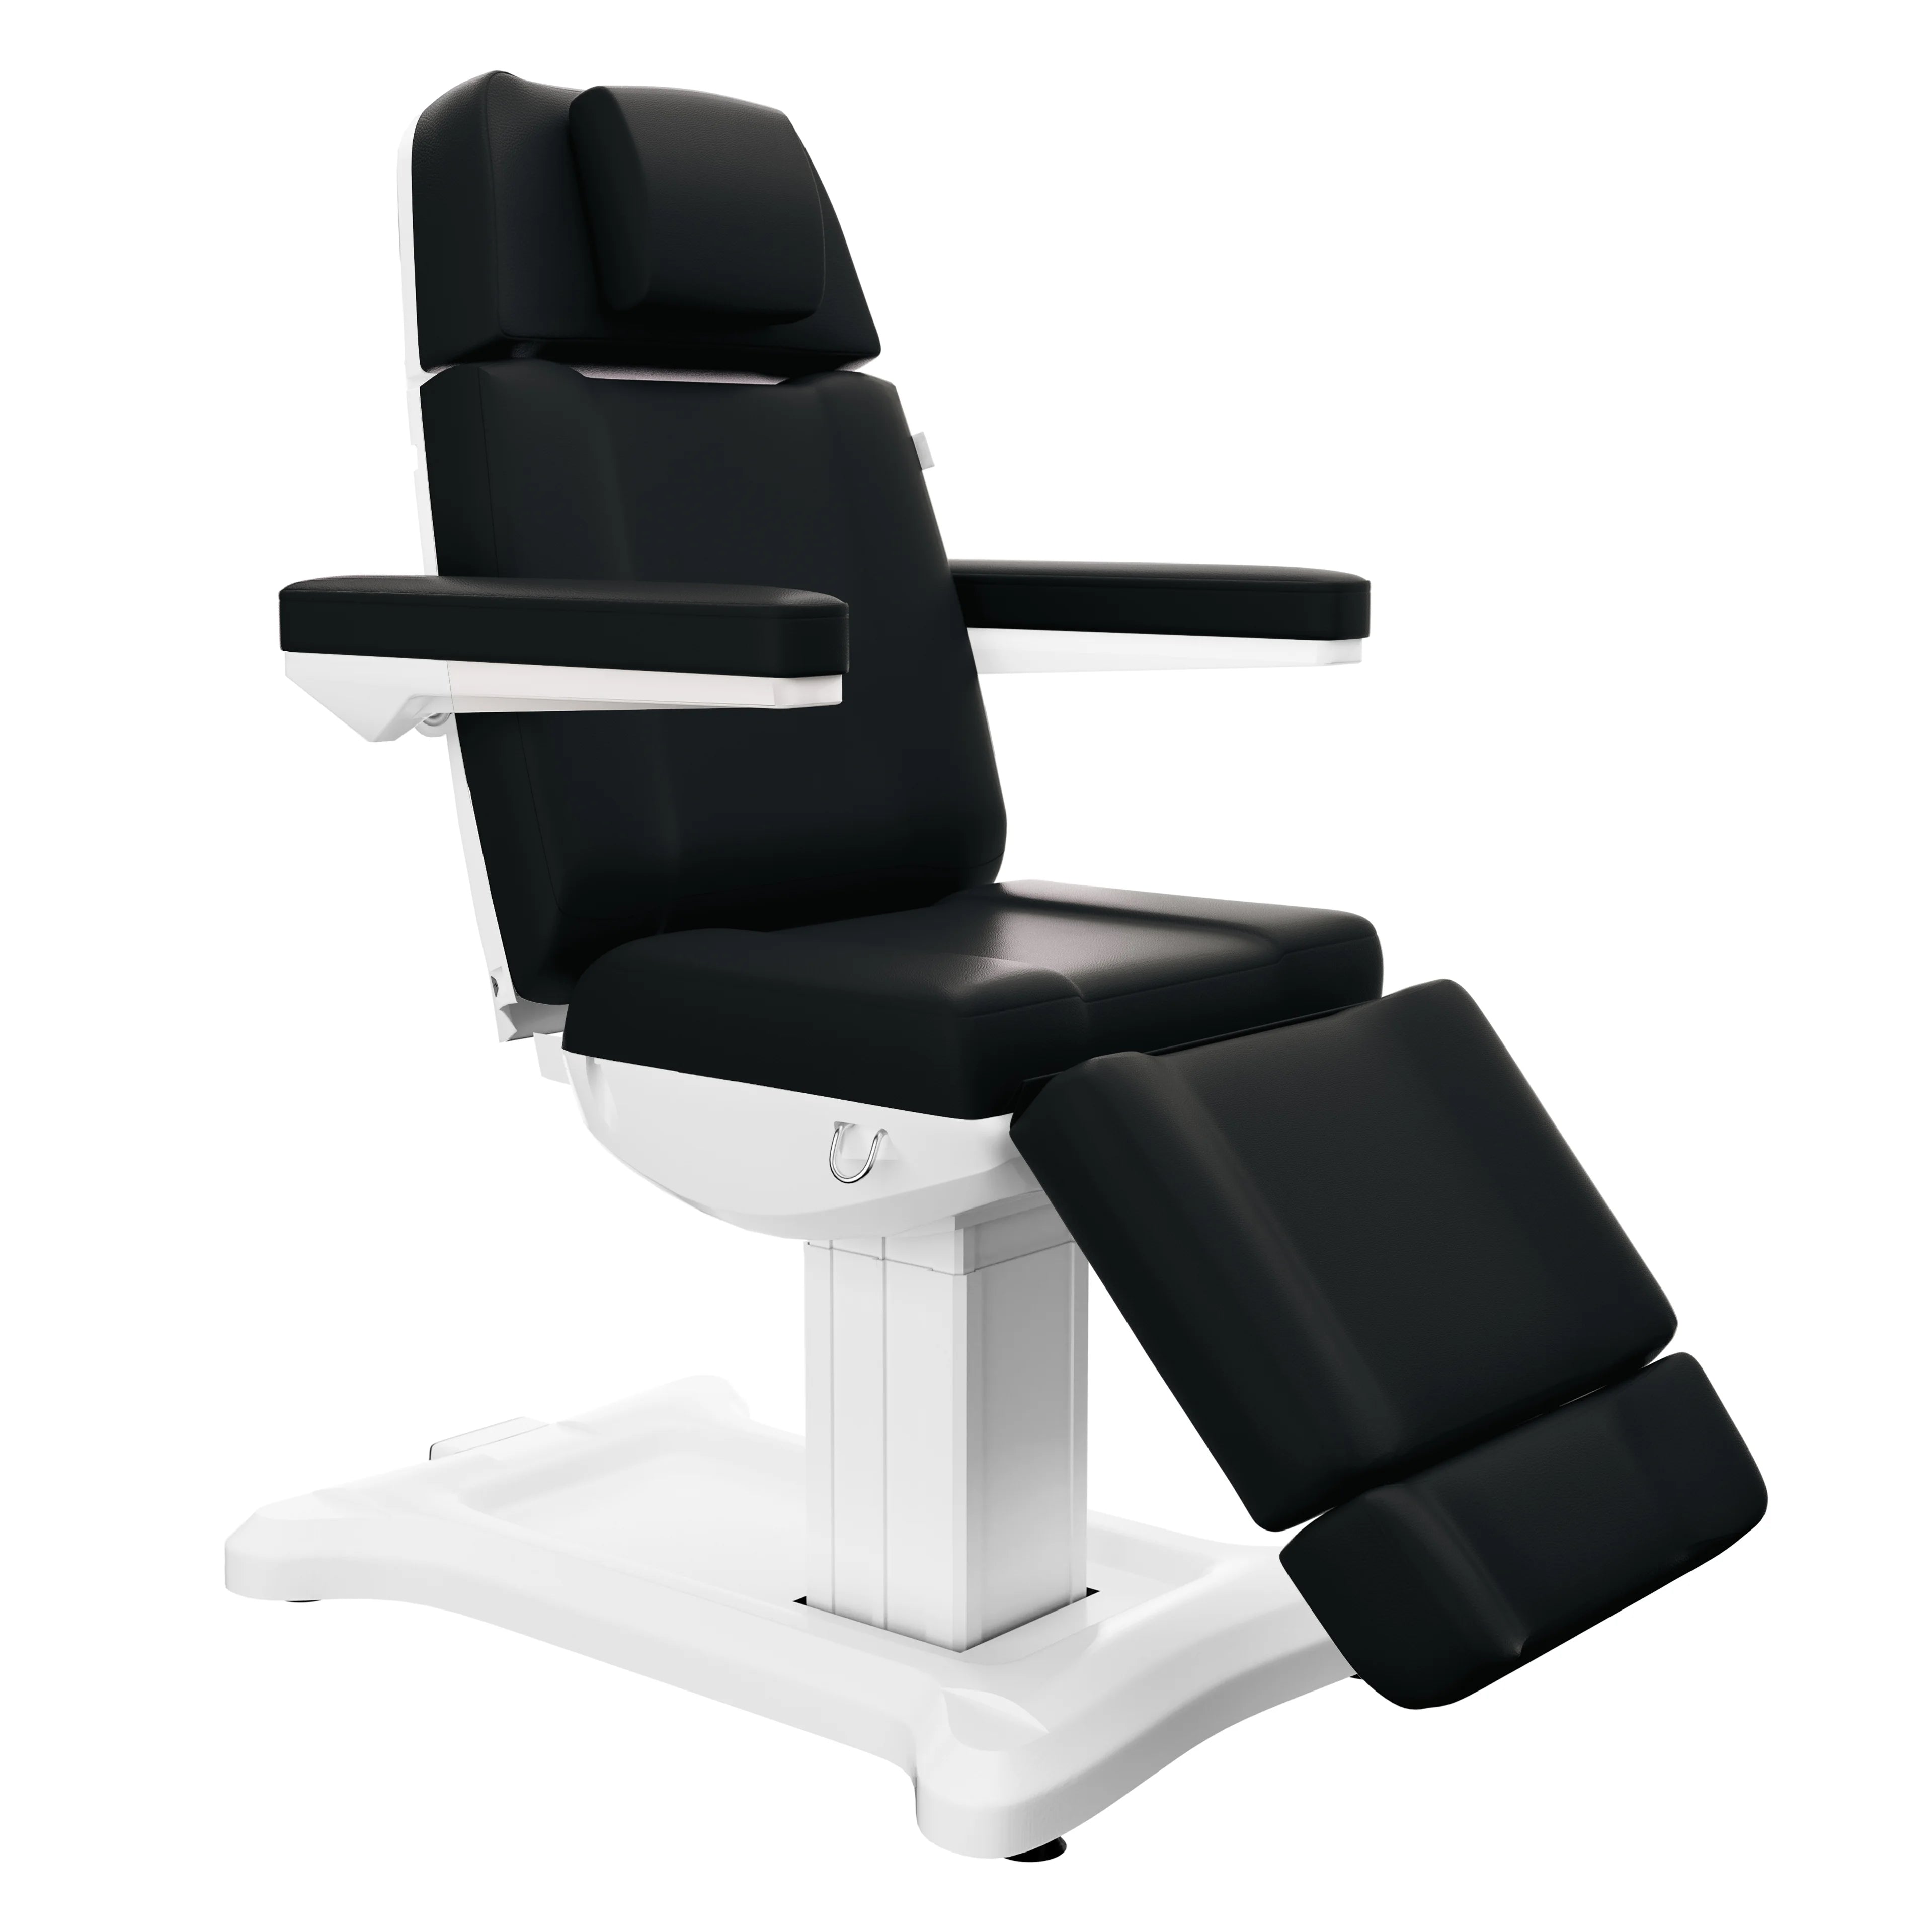 SpaMarc . Tomar . 3 Motor Spa Treatment Chair / Bed